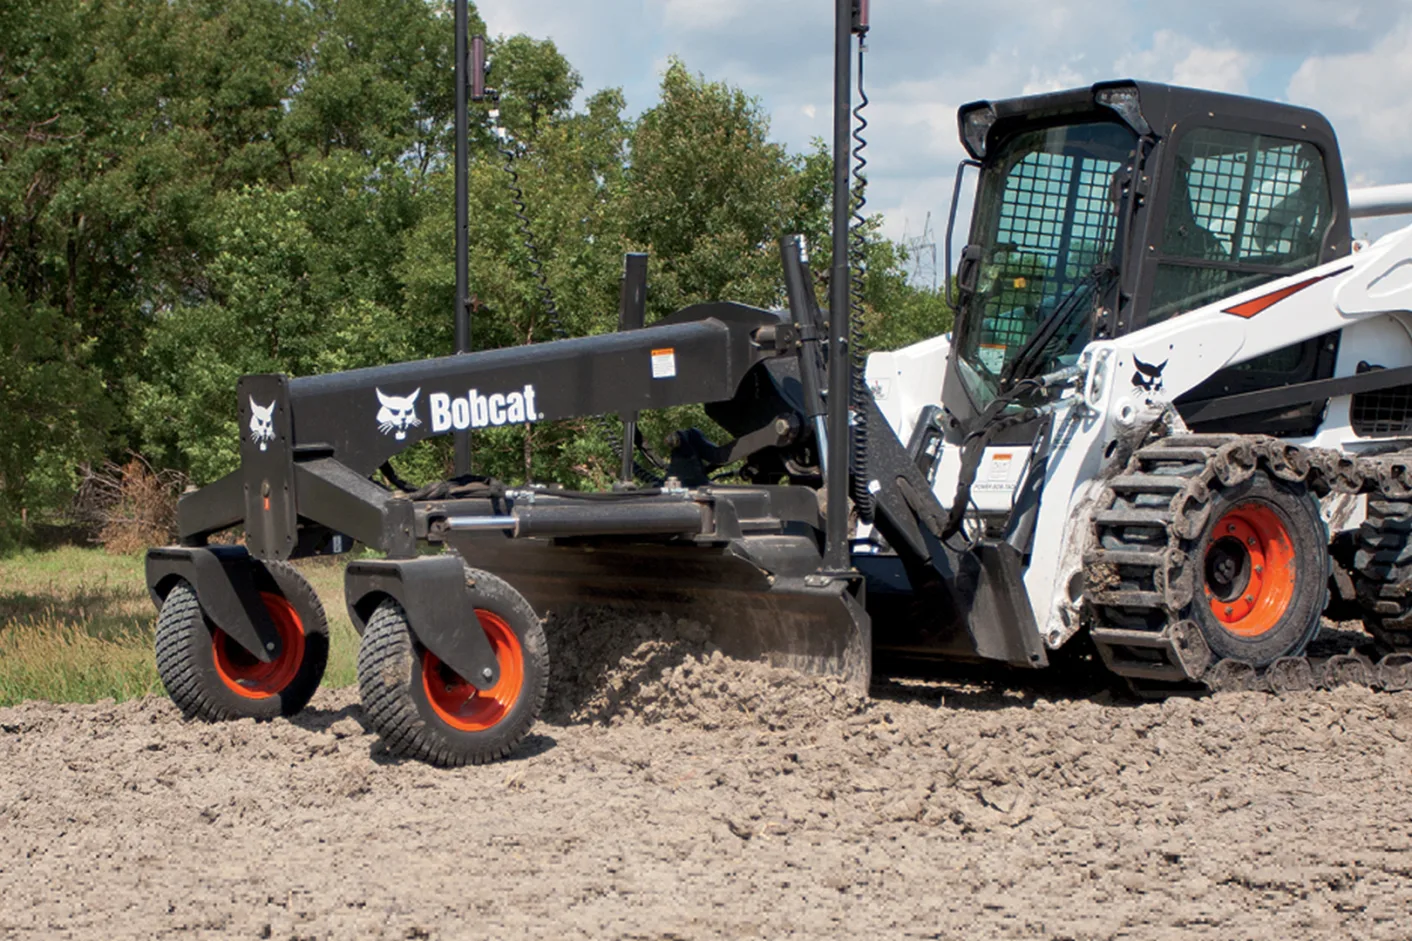 Browse Specs and more for the Bobcat S750 Skid-Steer Loader - Bobcat of North Texas